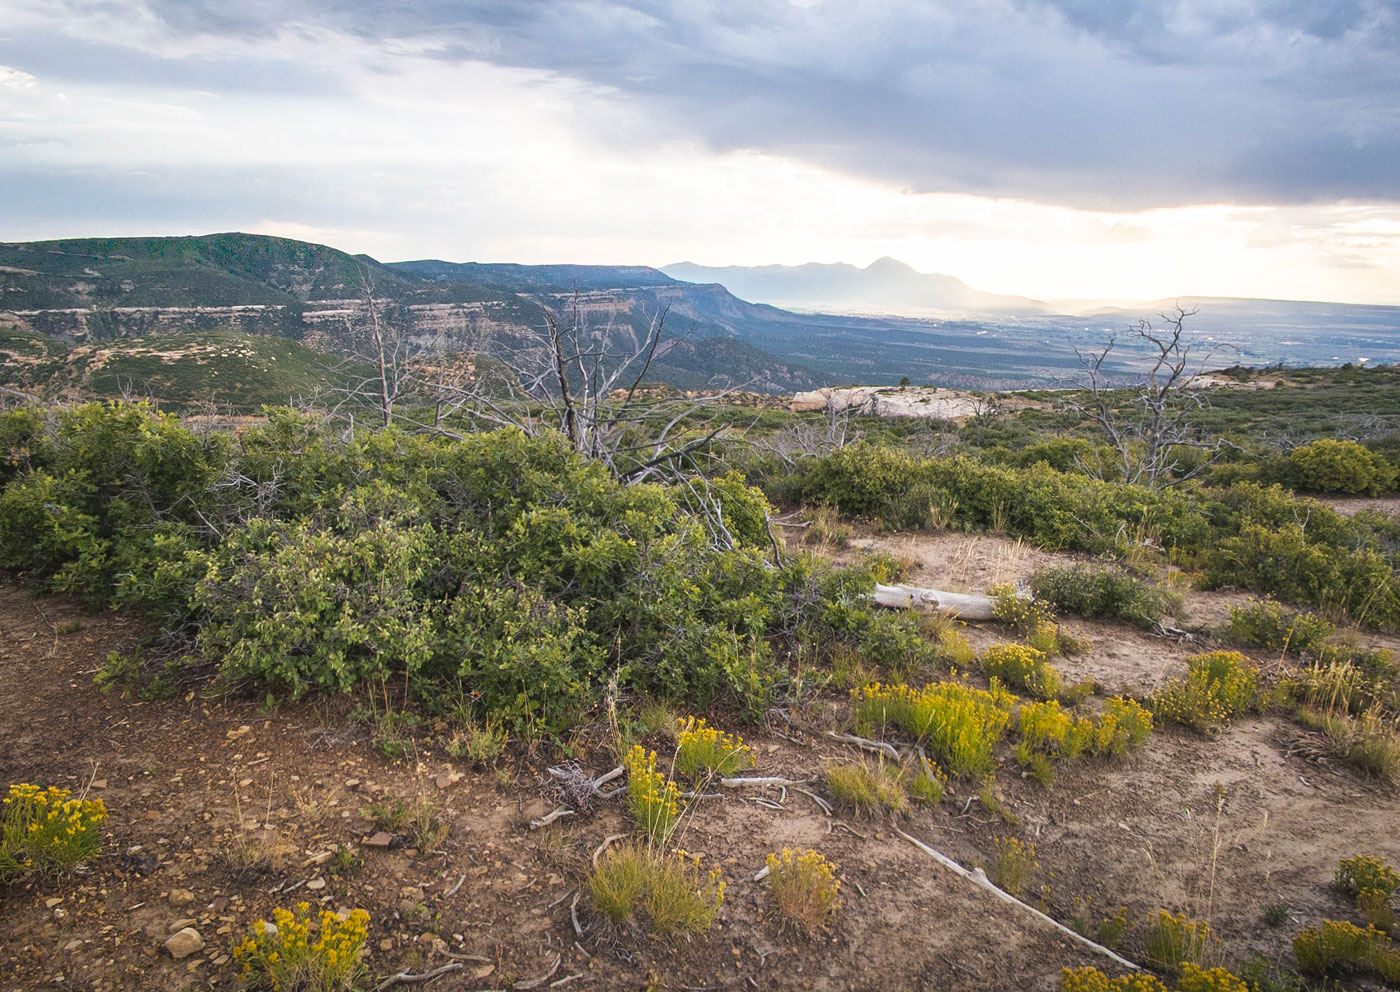 Hike Point Lookout and Prater Ridge in Mesa Verde National Park, Colorado - Stav is Lost